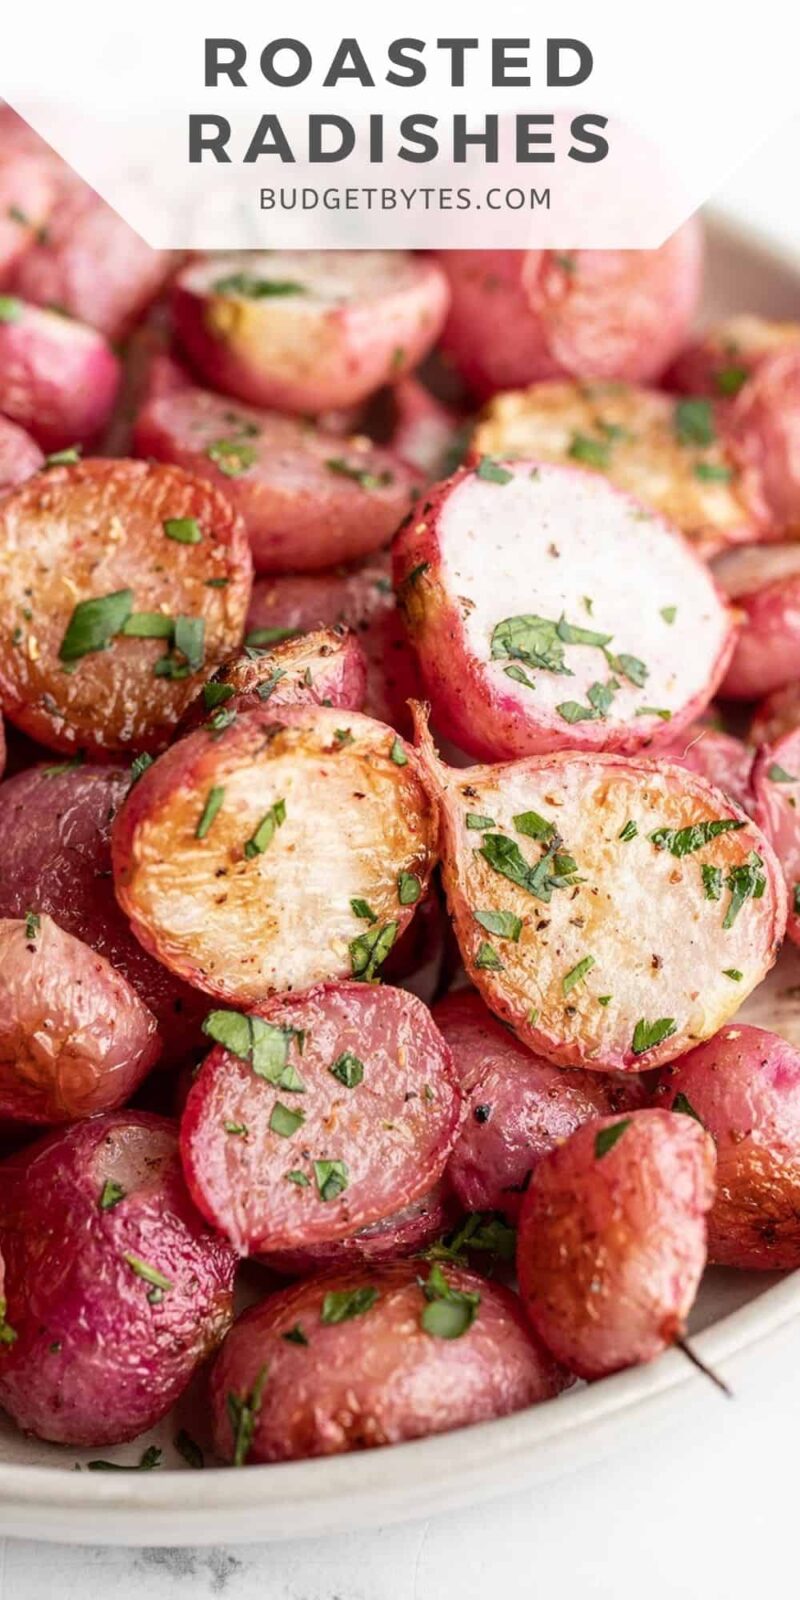 Close up side view of roasted radishes in a bowl, title text at the top.